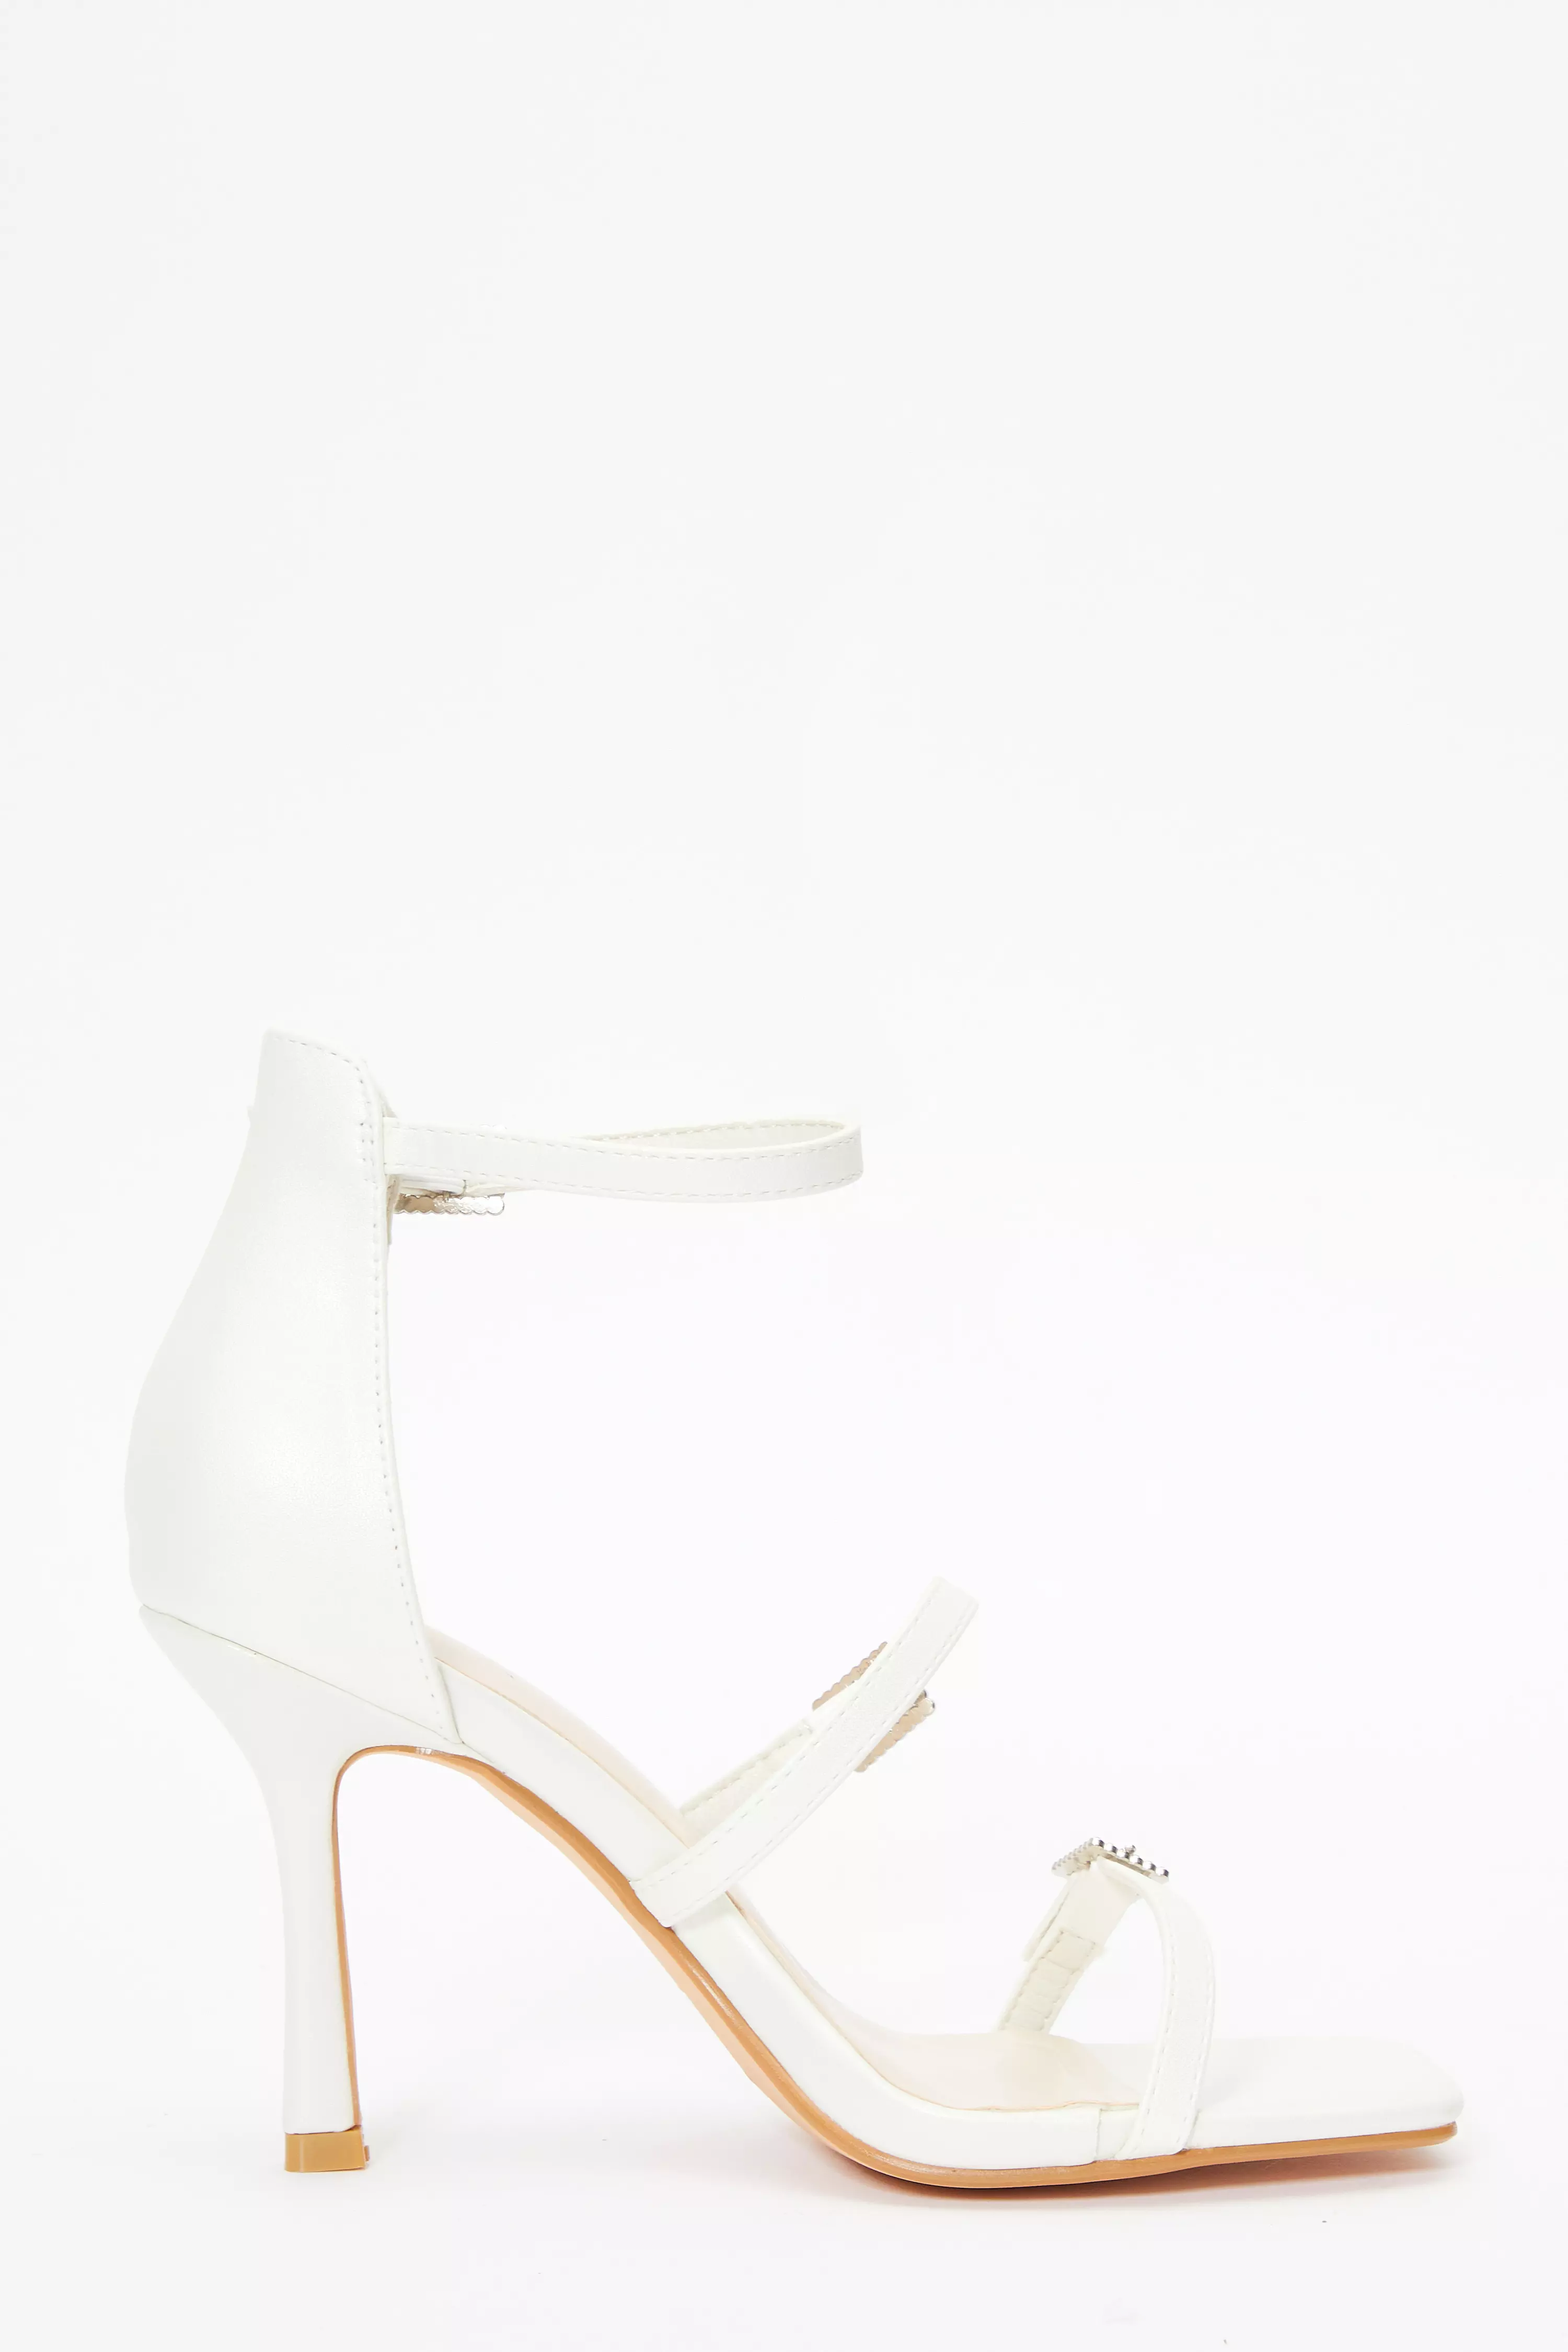 Bridal White Faux Leather Strappy Buckle Heeled Sandals - QUIZ Clothing